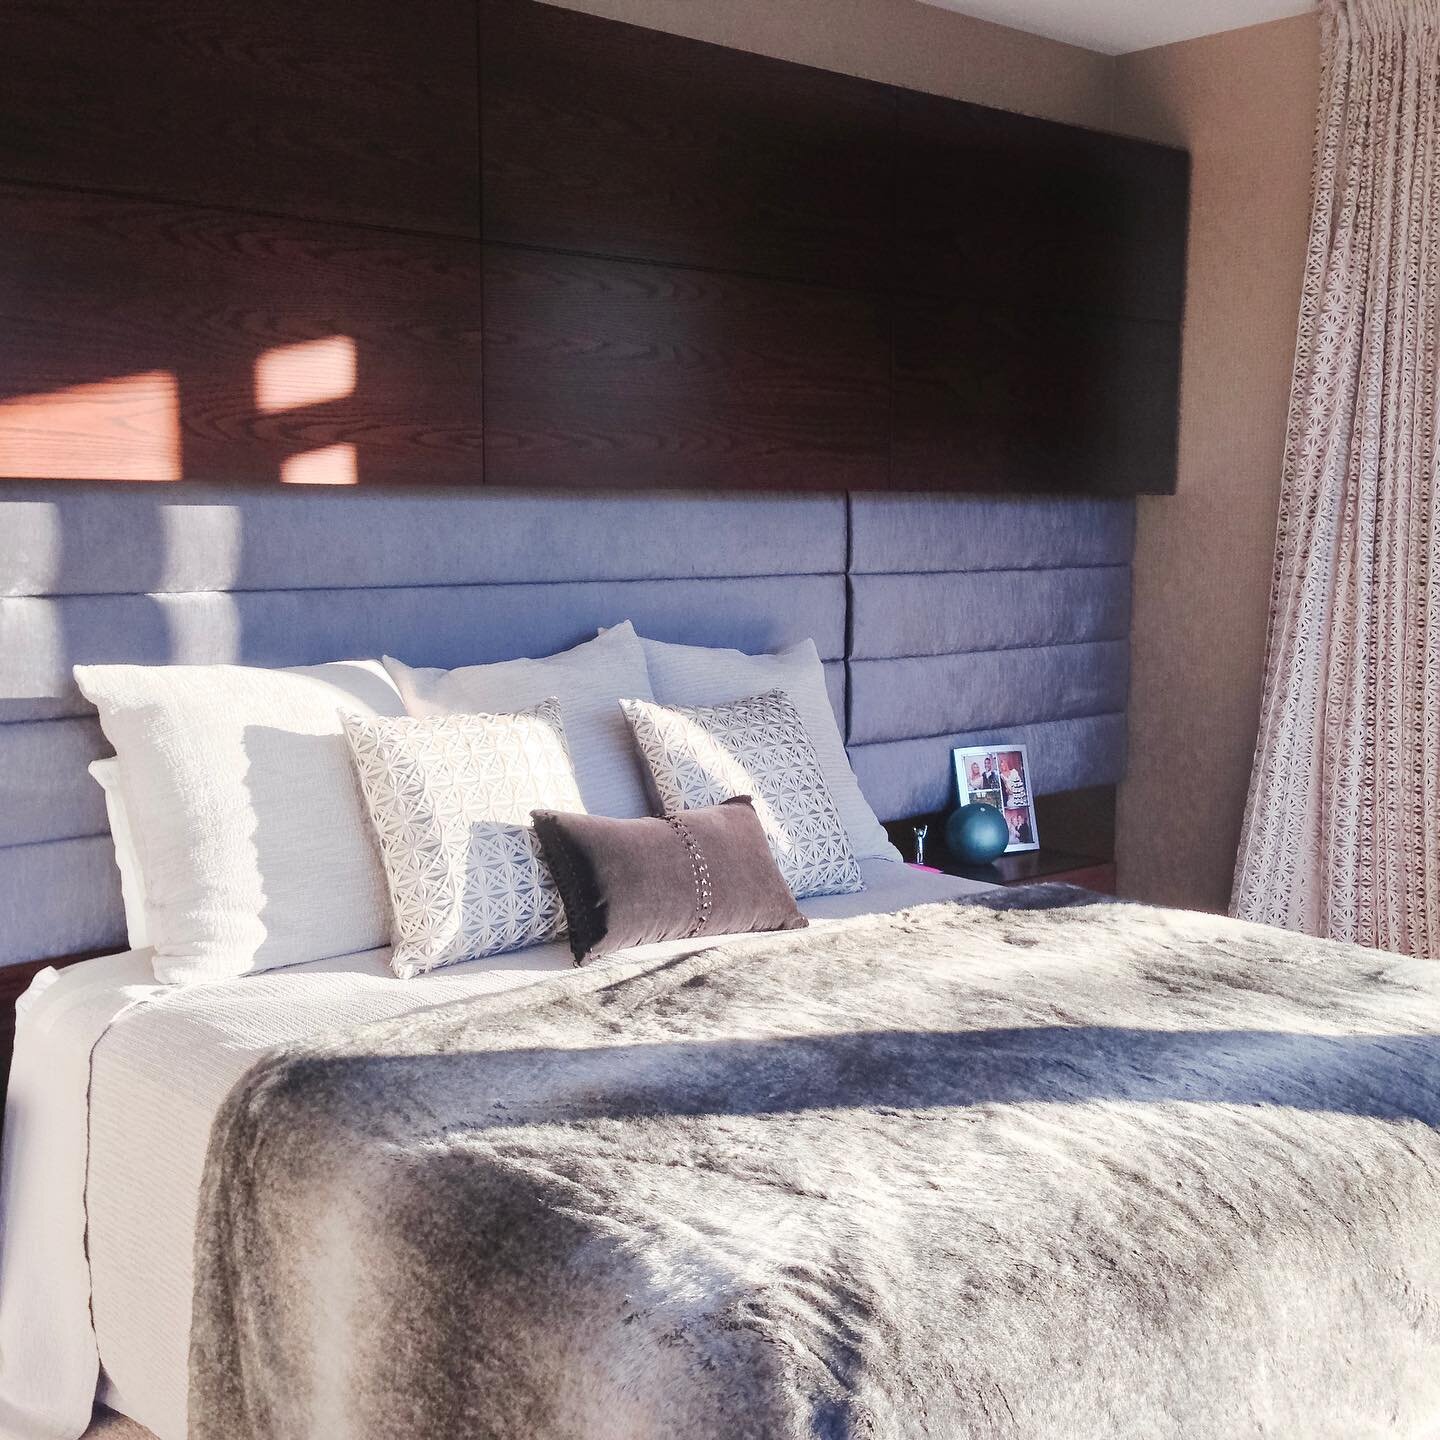 This is a master bedroom that I designed in New Zealand. The storage in this custom headboard is awesome. The panels above the bed open upwards for plenty of storage. It&rsquo;s a great way to hide clutter in your bedroom. Modern simplicity expresses